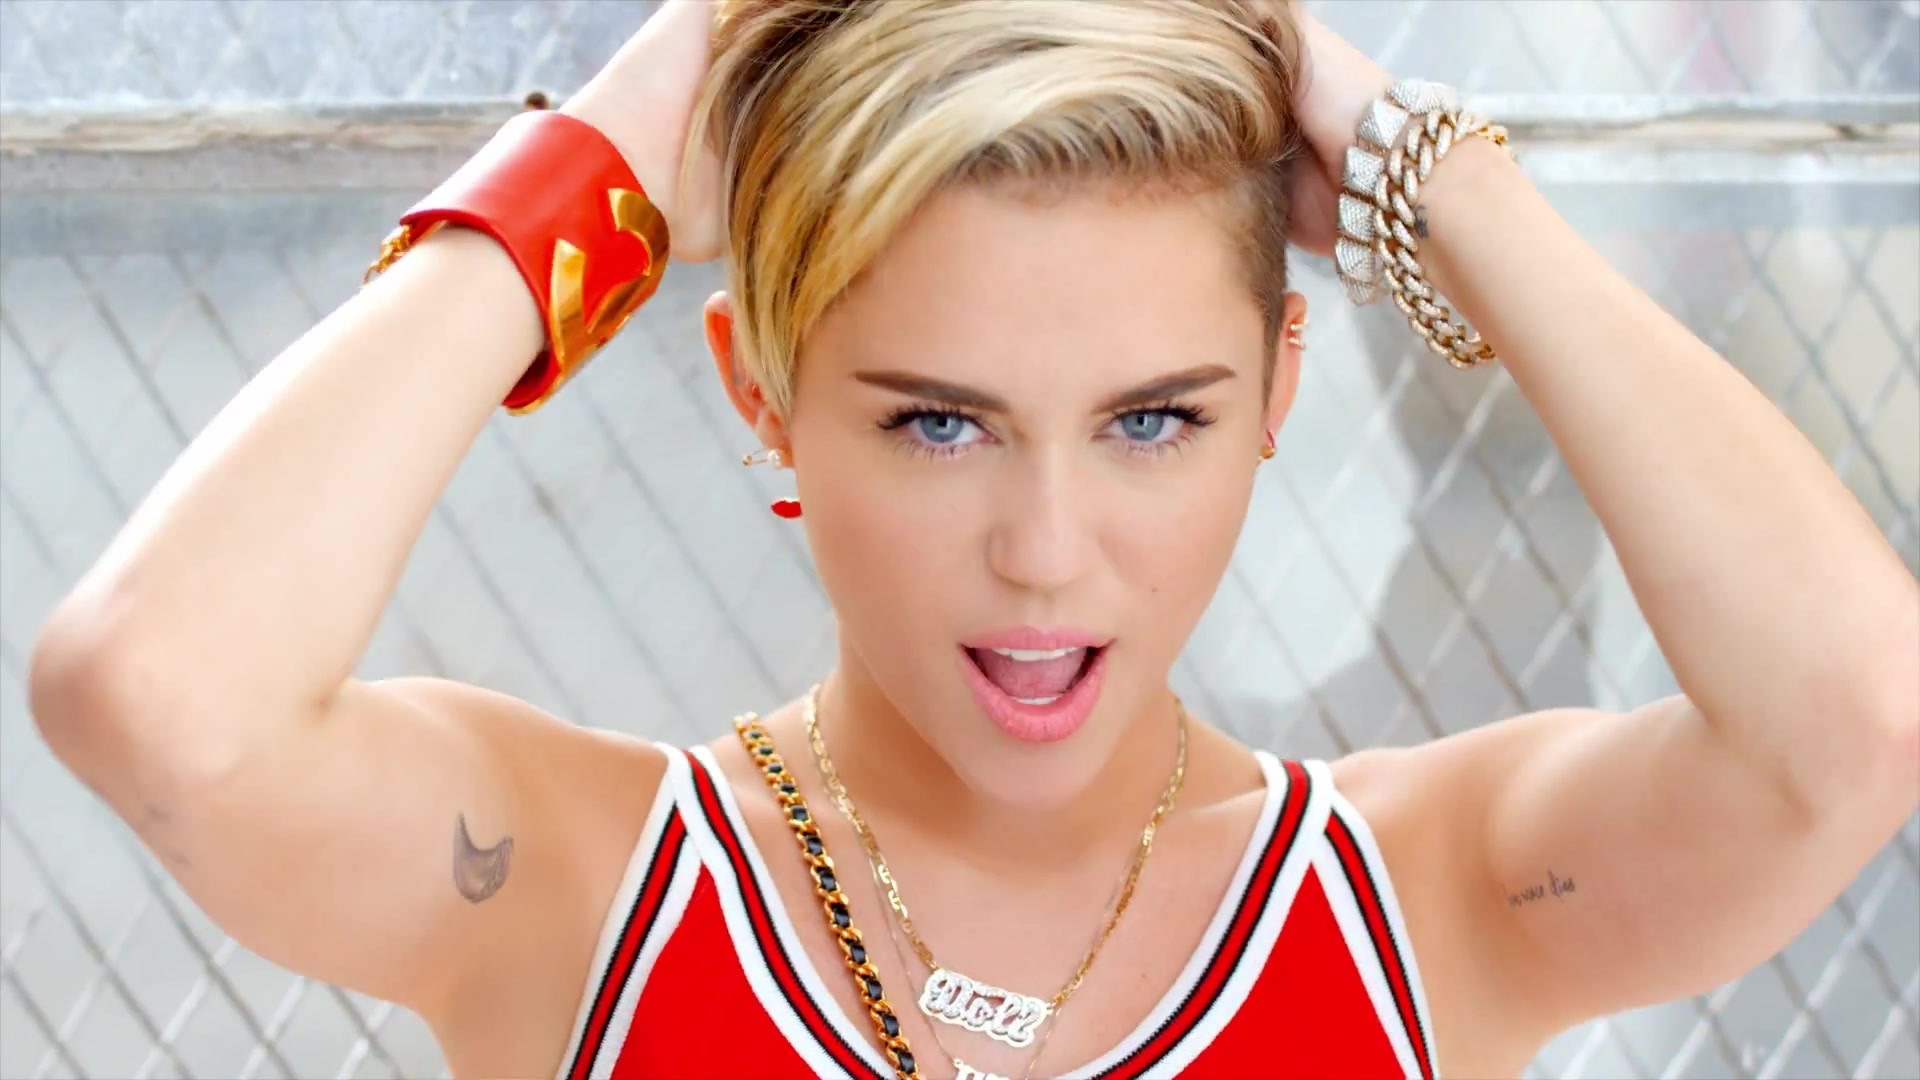 Awesome Backgrounds – Miley Cyrus